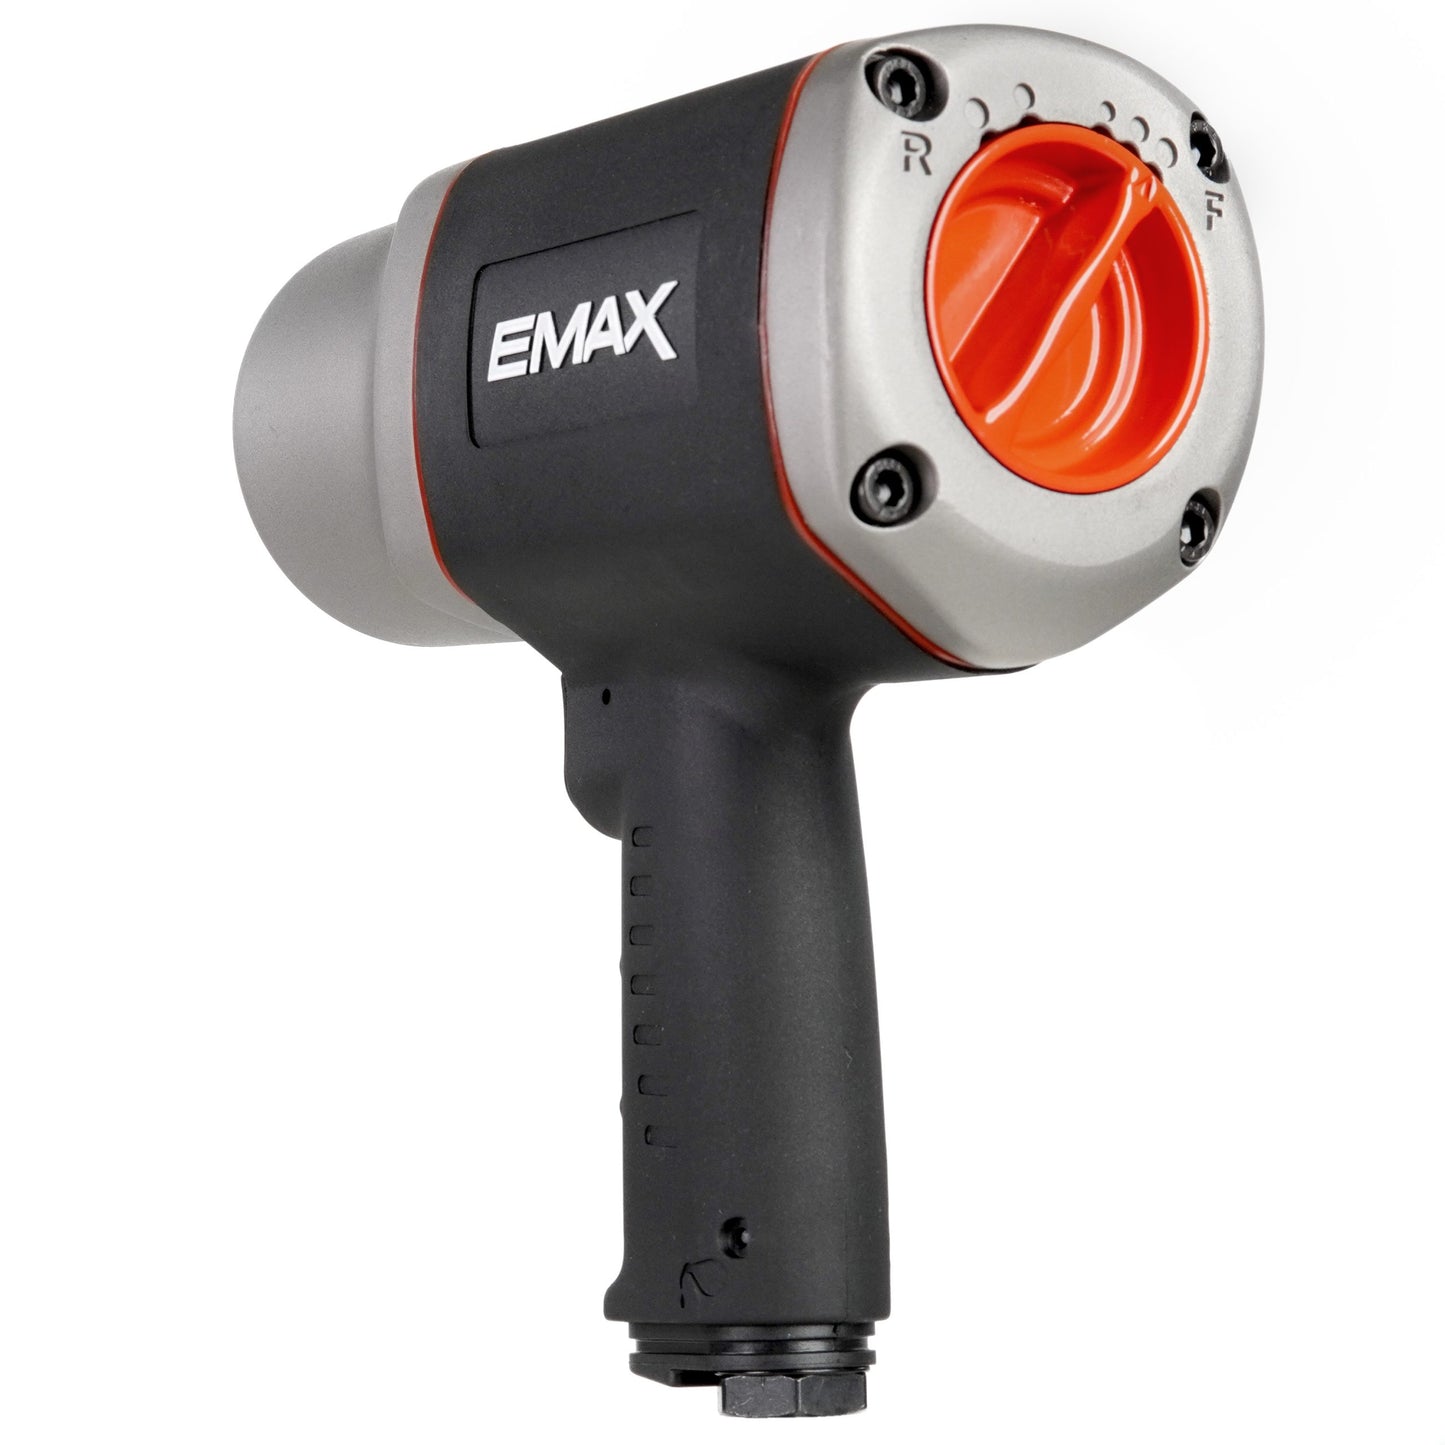 EMAX 3/4″ Air Impact Wrench, Heavy Duty